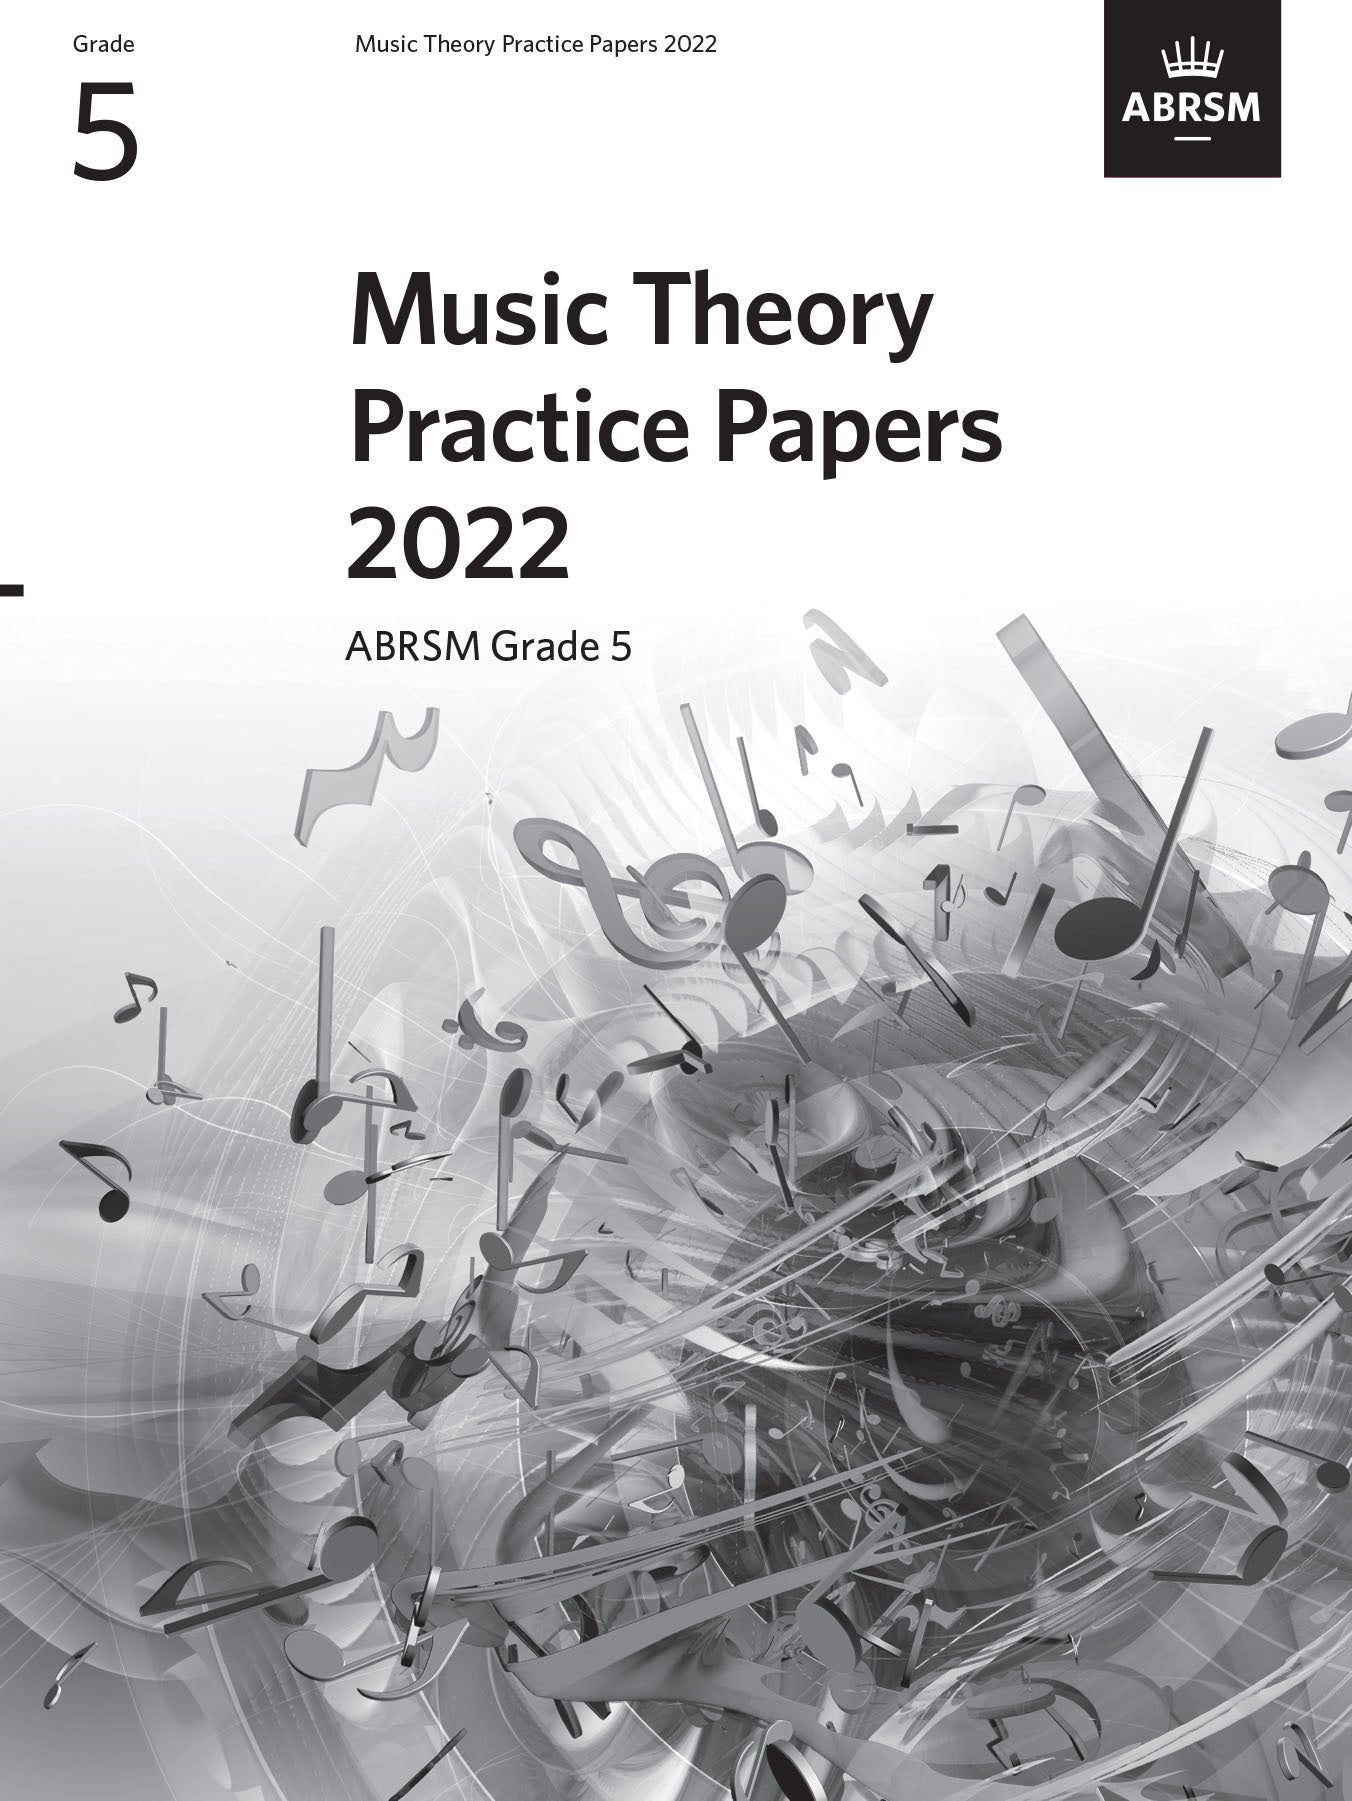 ABRSM Music Theory Practice Papers 2022 Grade 5